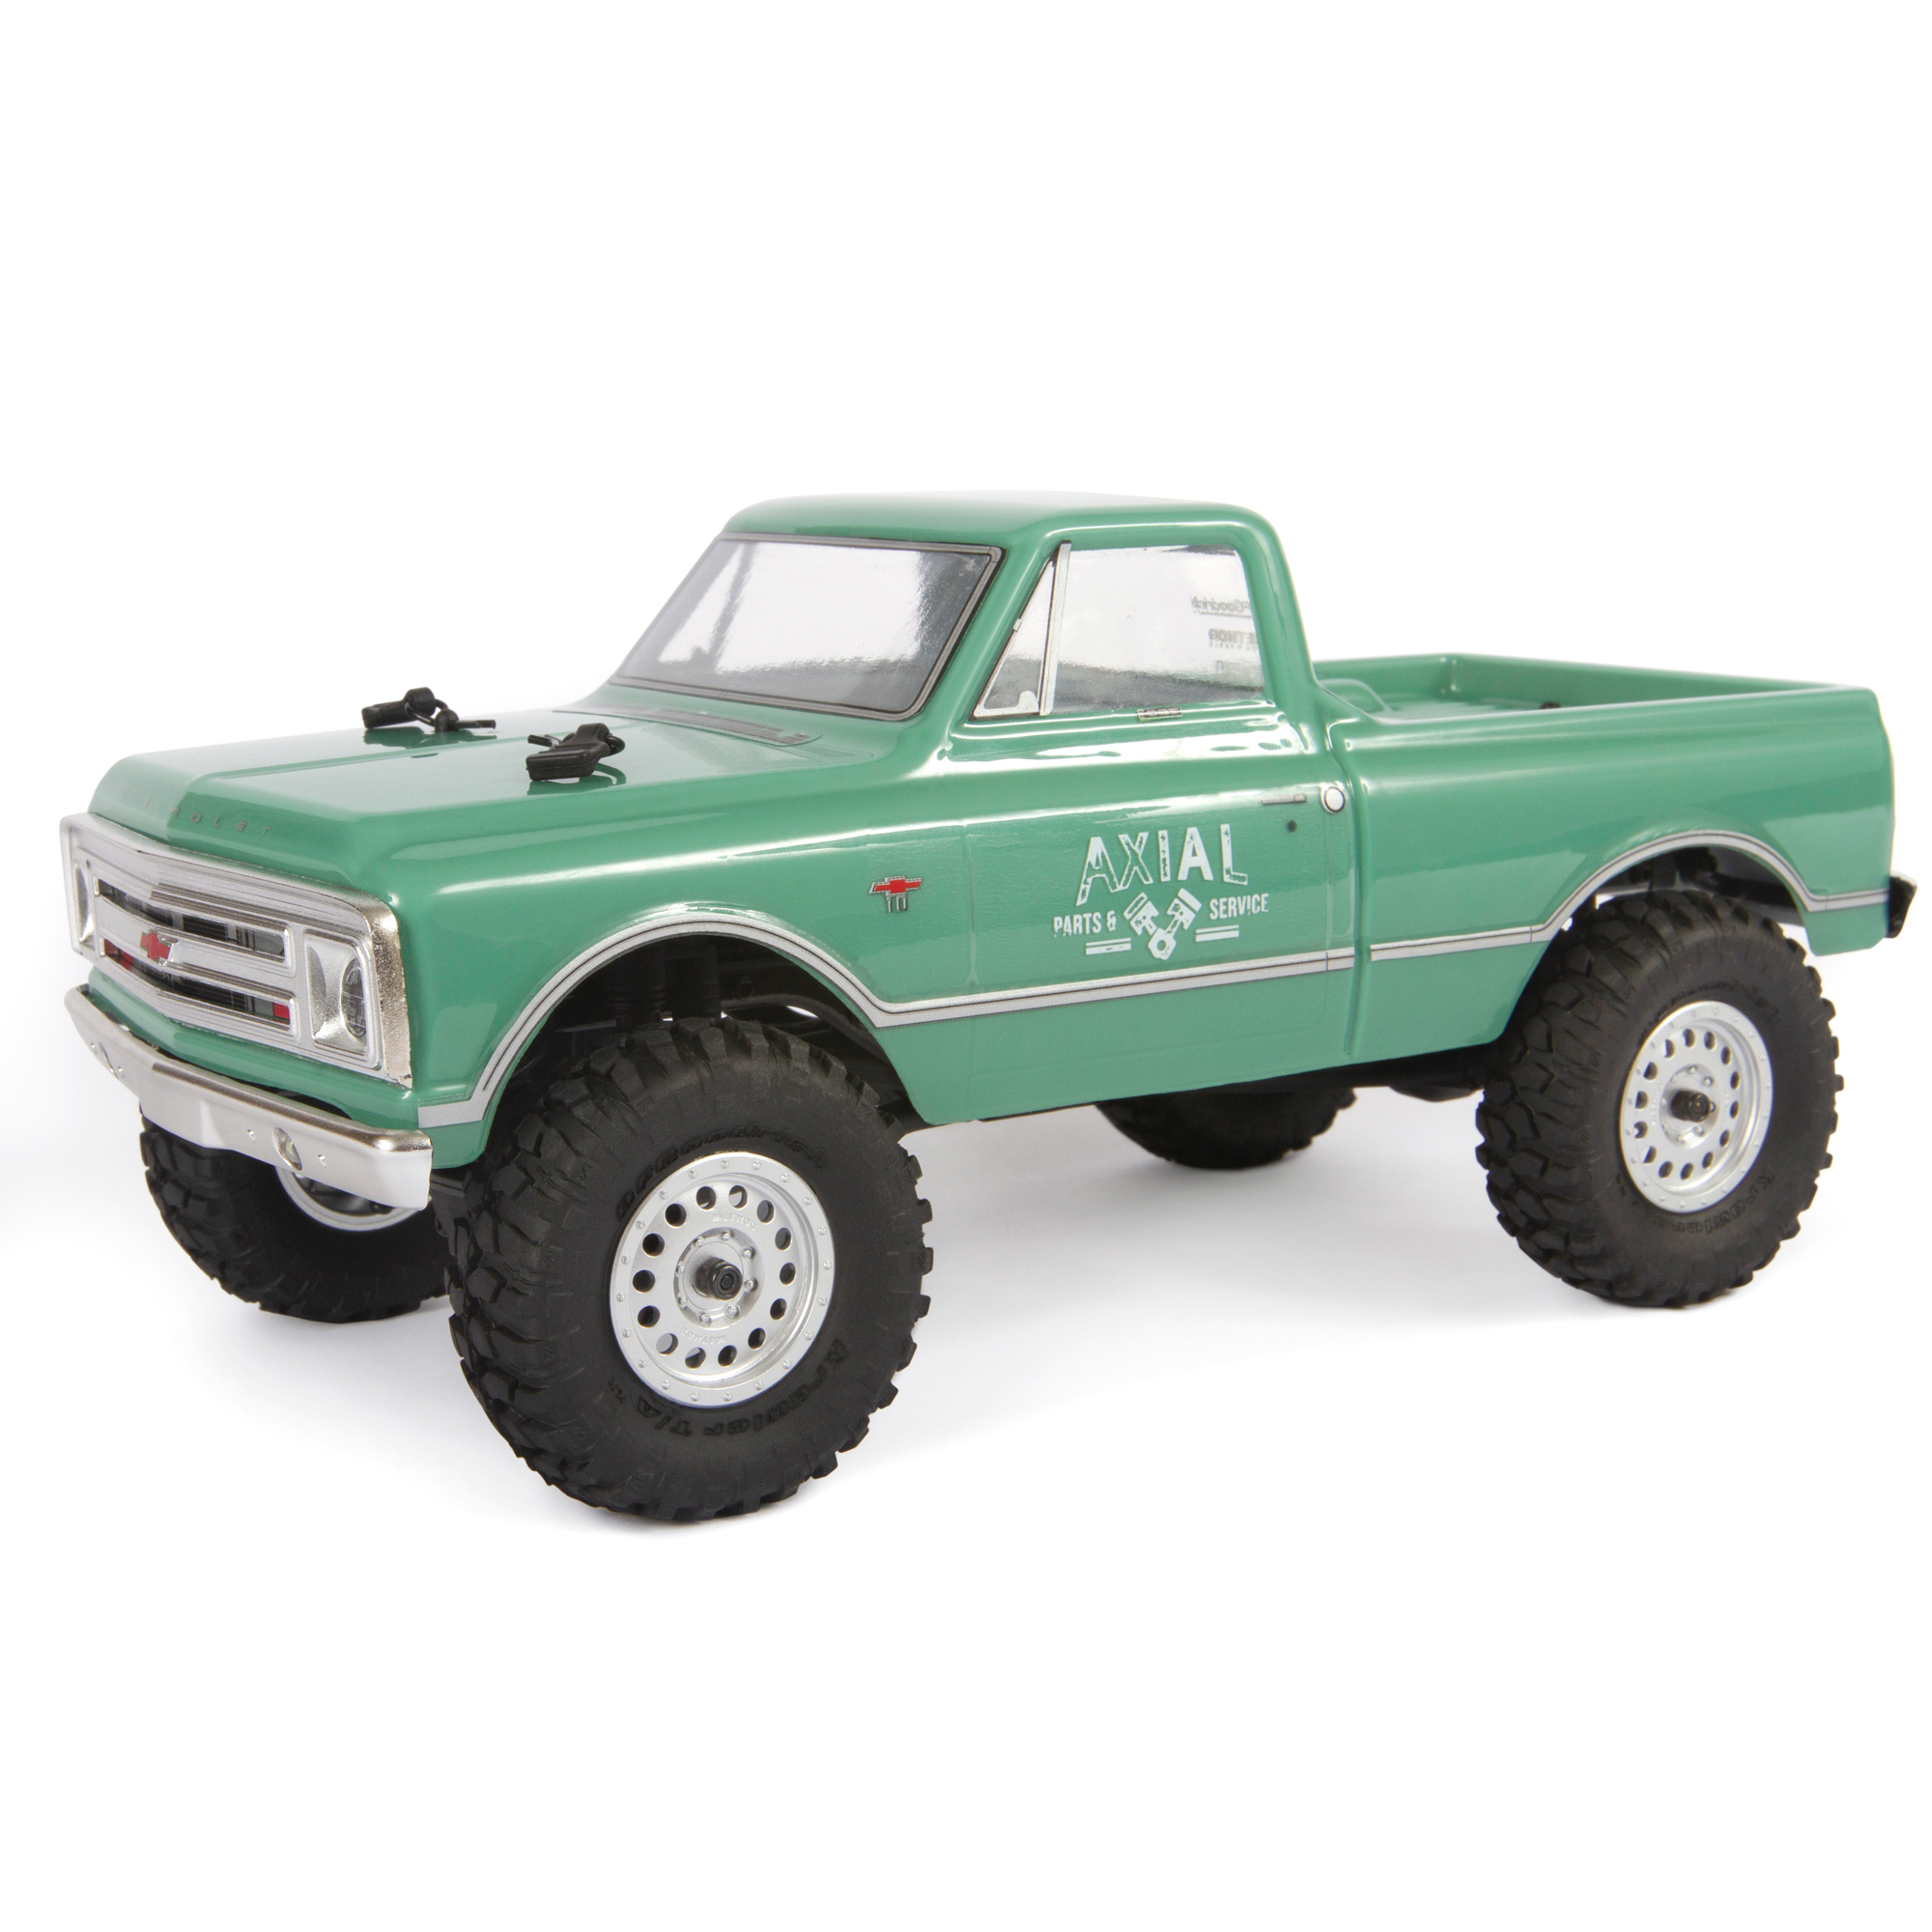 Axial 1/24 SCX24 1967 Chevrolet C10 4 Wheel Drive Truck Brushed RTR Ready to Run Green AXI00001T1 Trucks Electric RTR Other - image 1 of 9